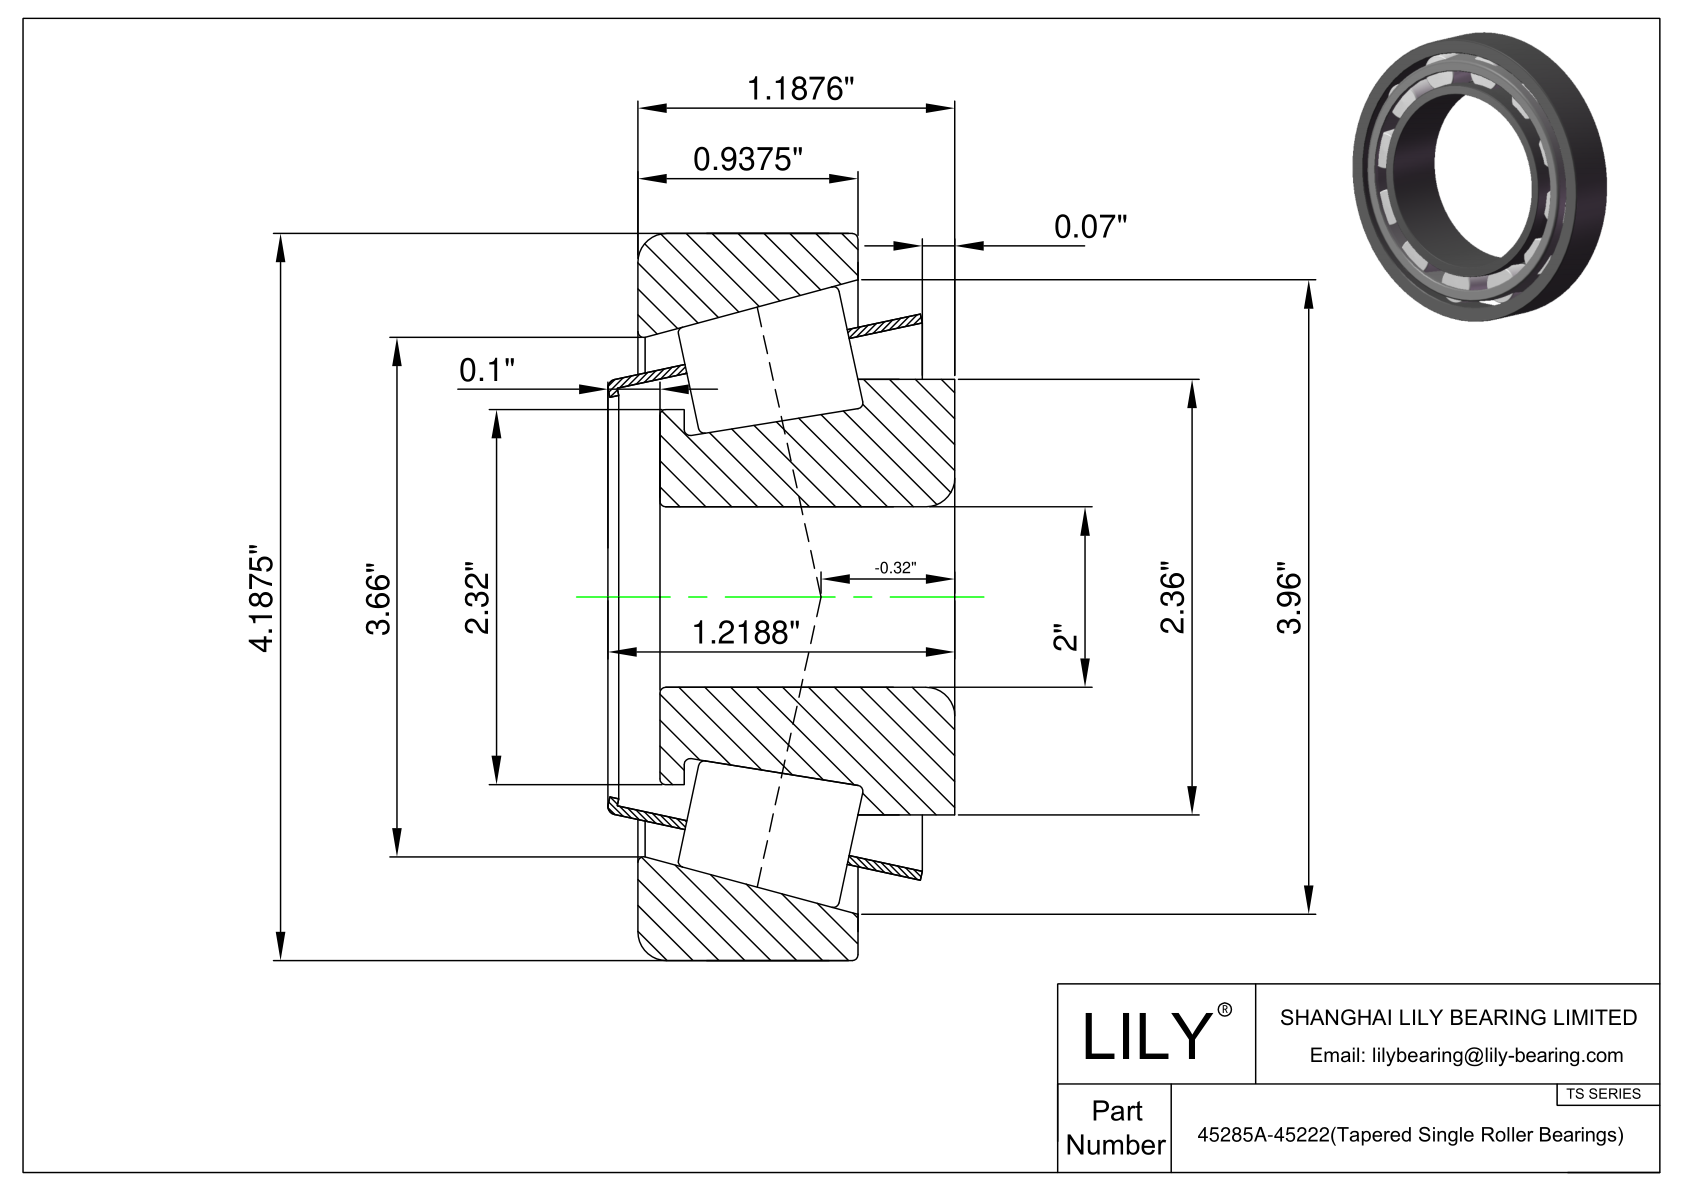 45285A-45222 TS (Tapered Single Roller Bearings) (Imperial) cad drawing